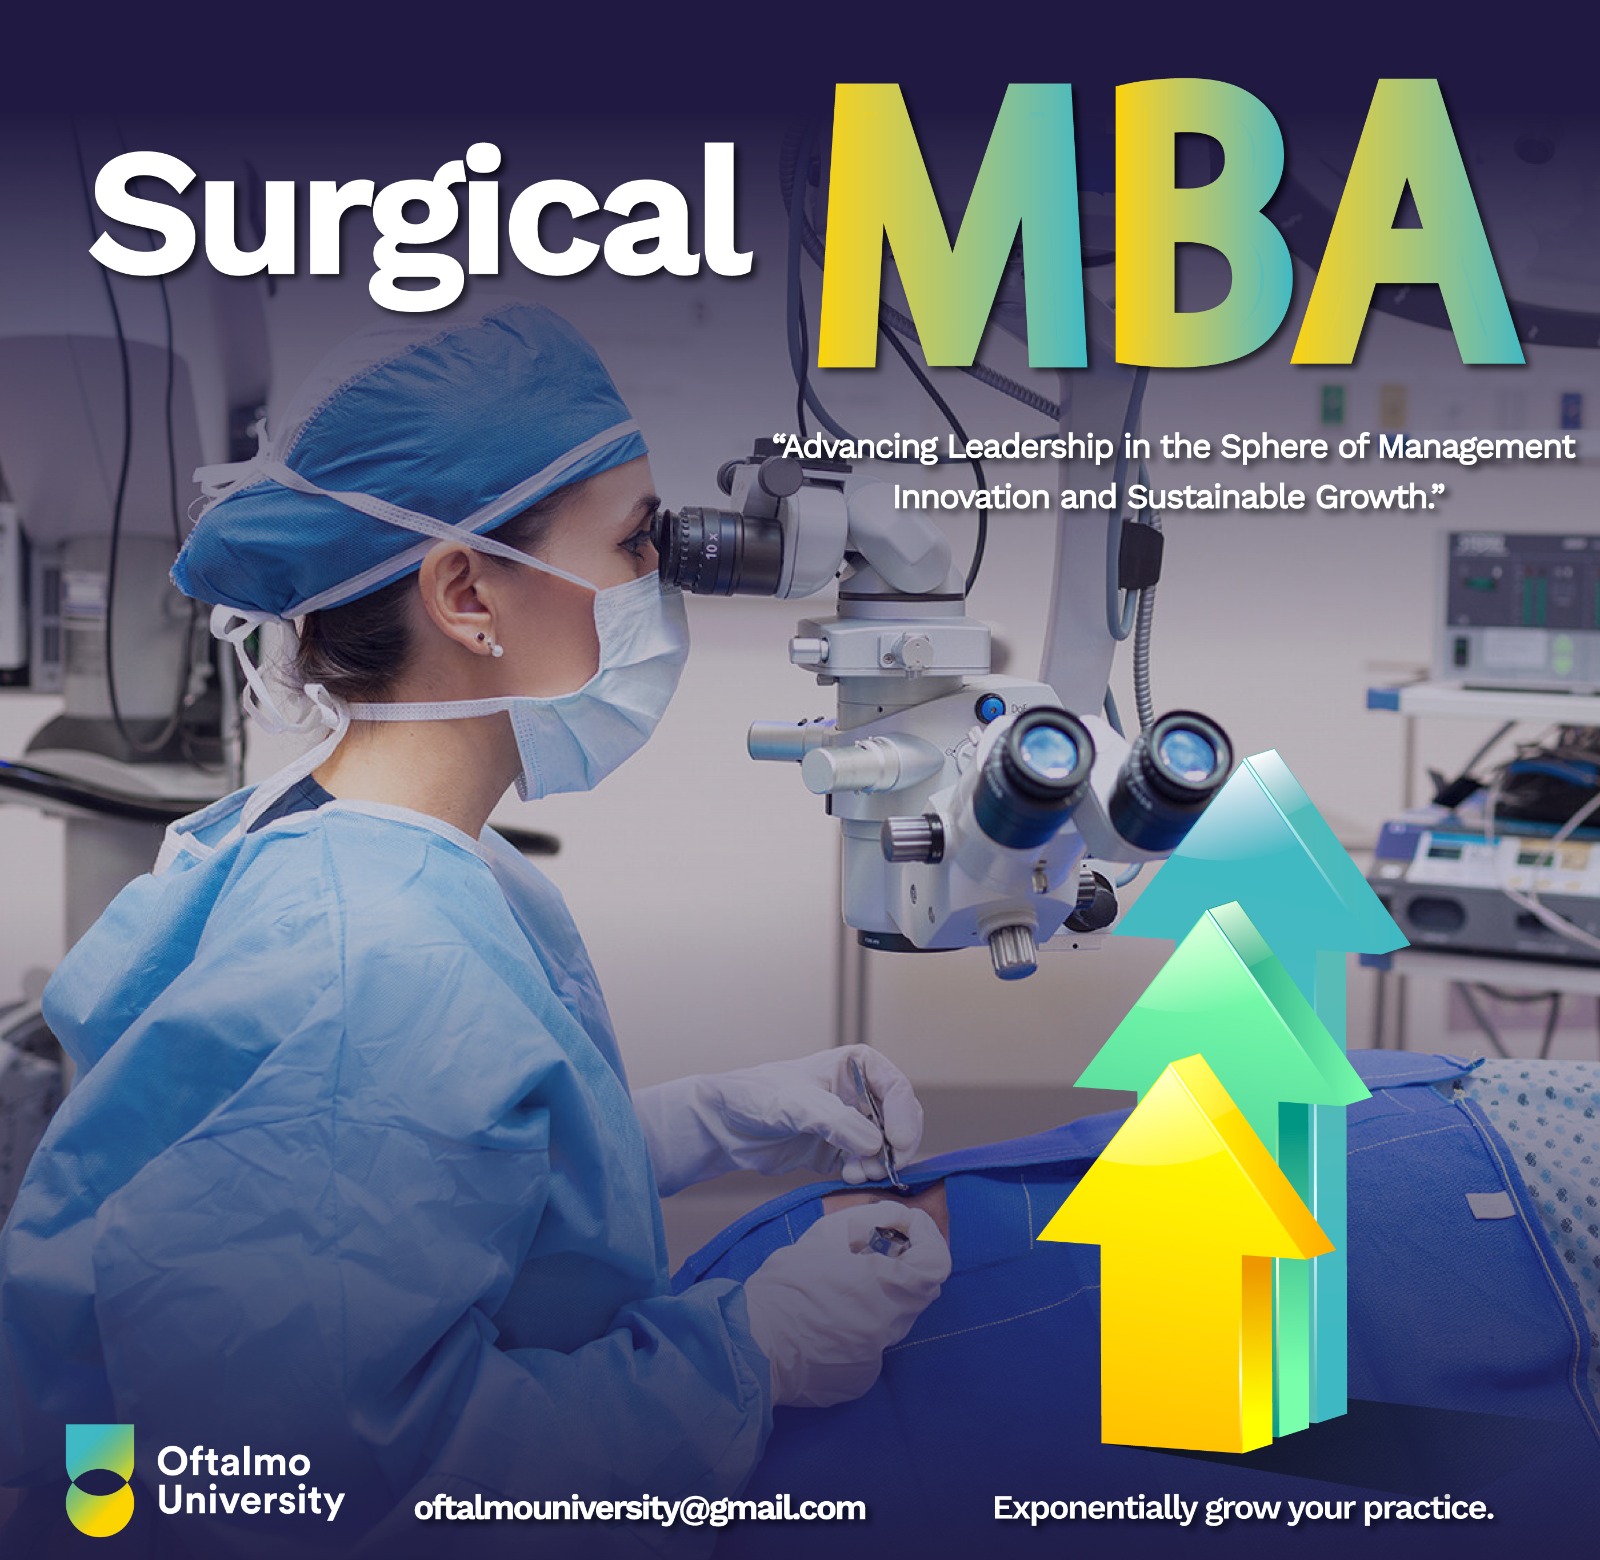 Surgical MBA